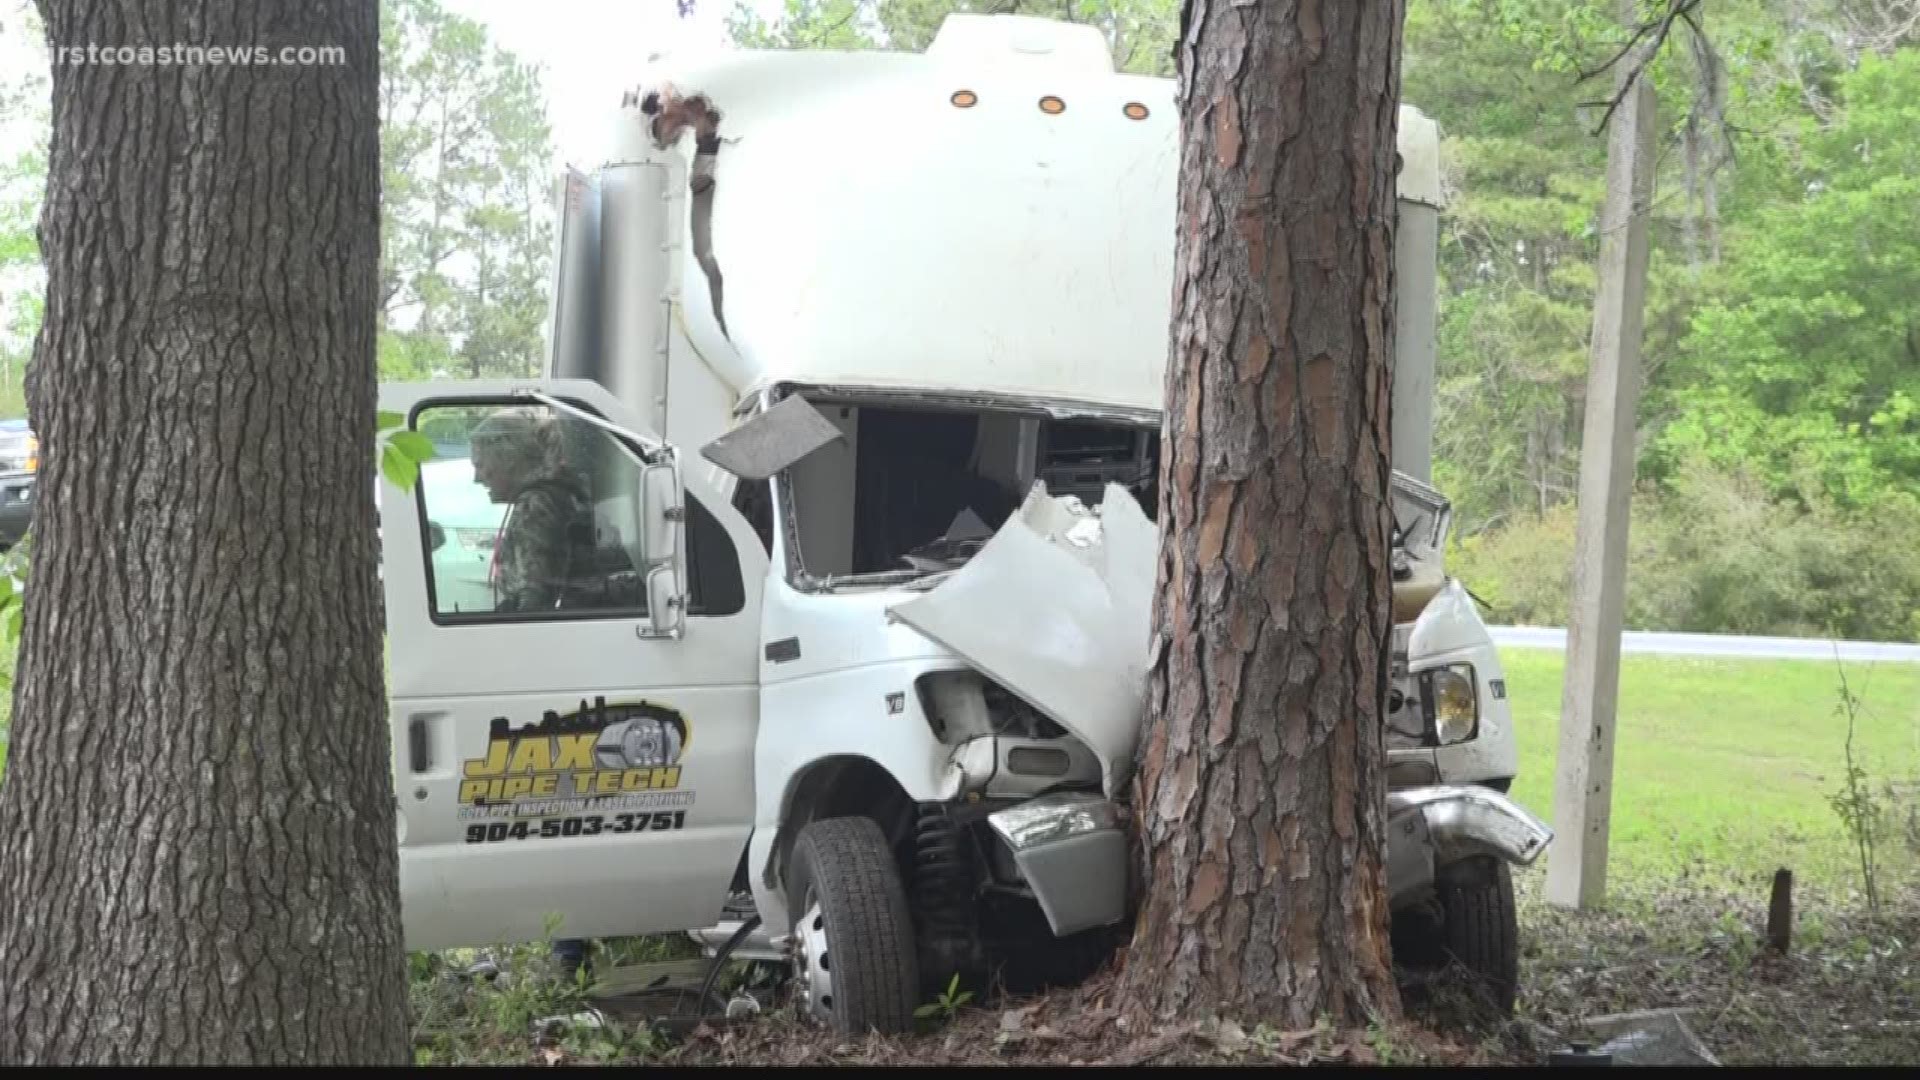 Crews with the Jacksonville Fire and Rescue Department are responding to a crash in the 9300 block of Chaffee Road on Wednesday morning.